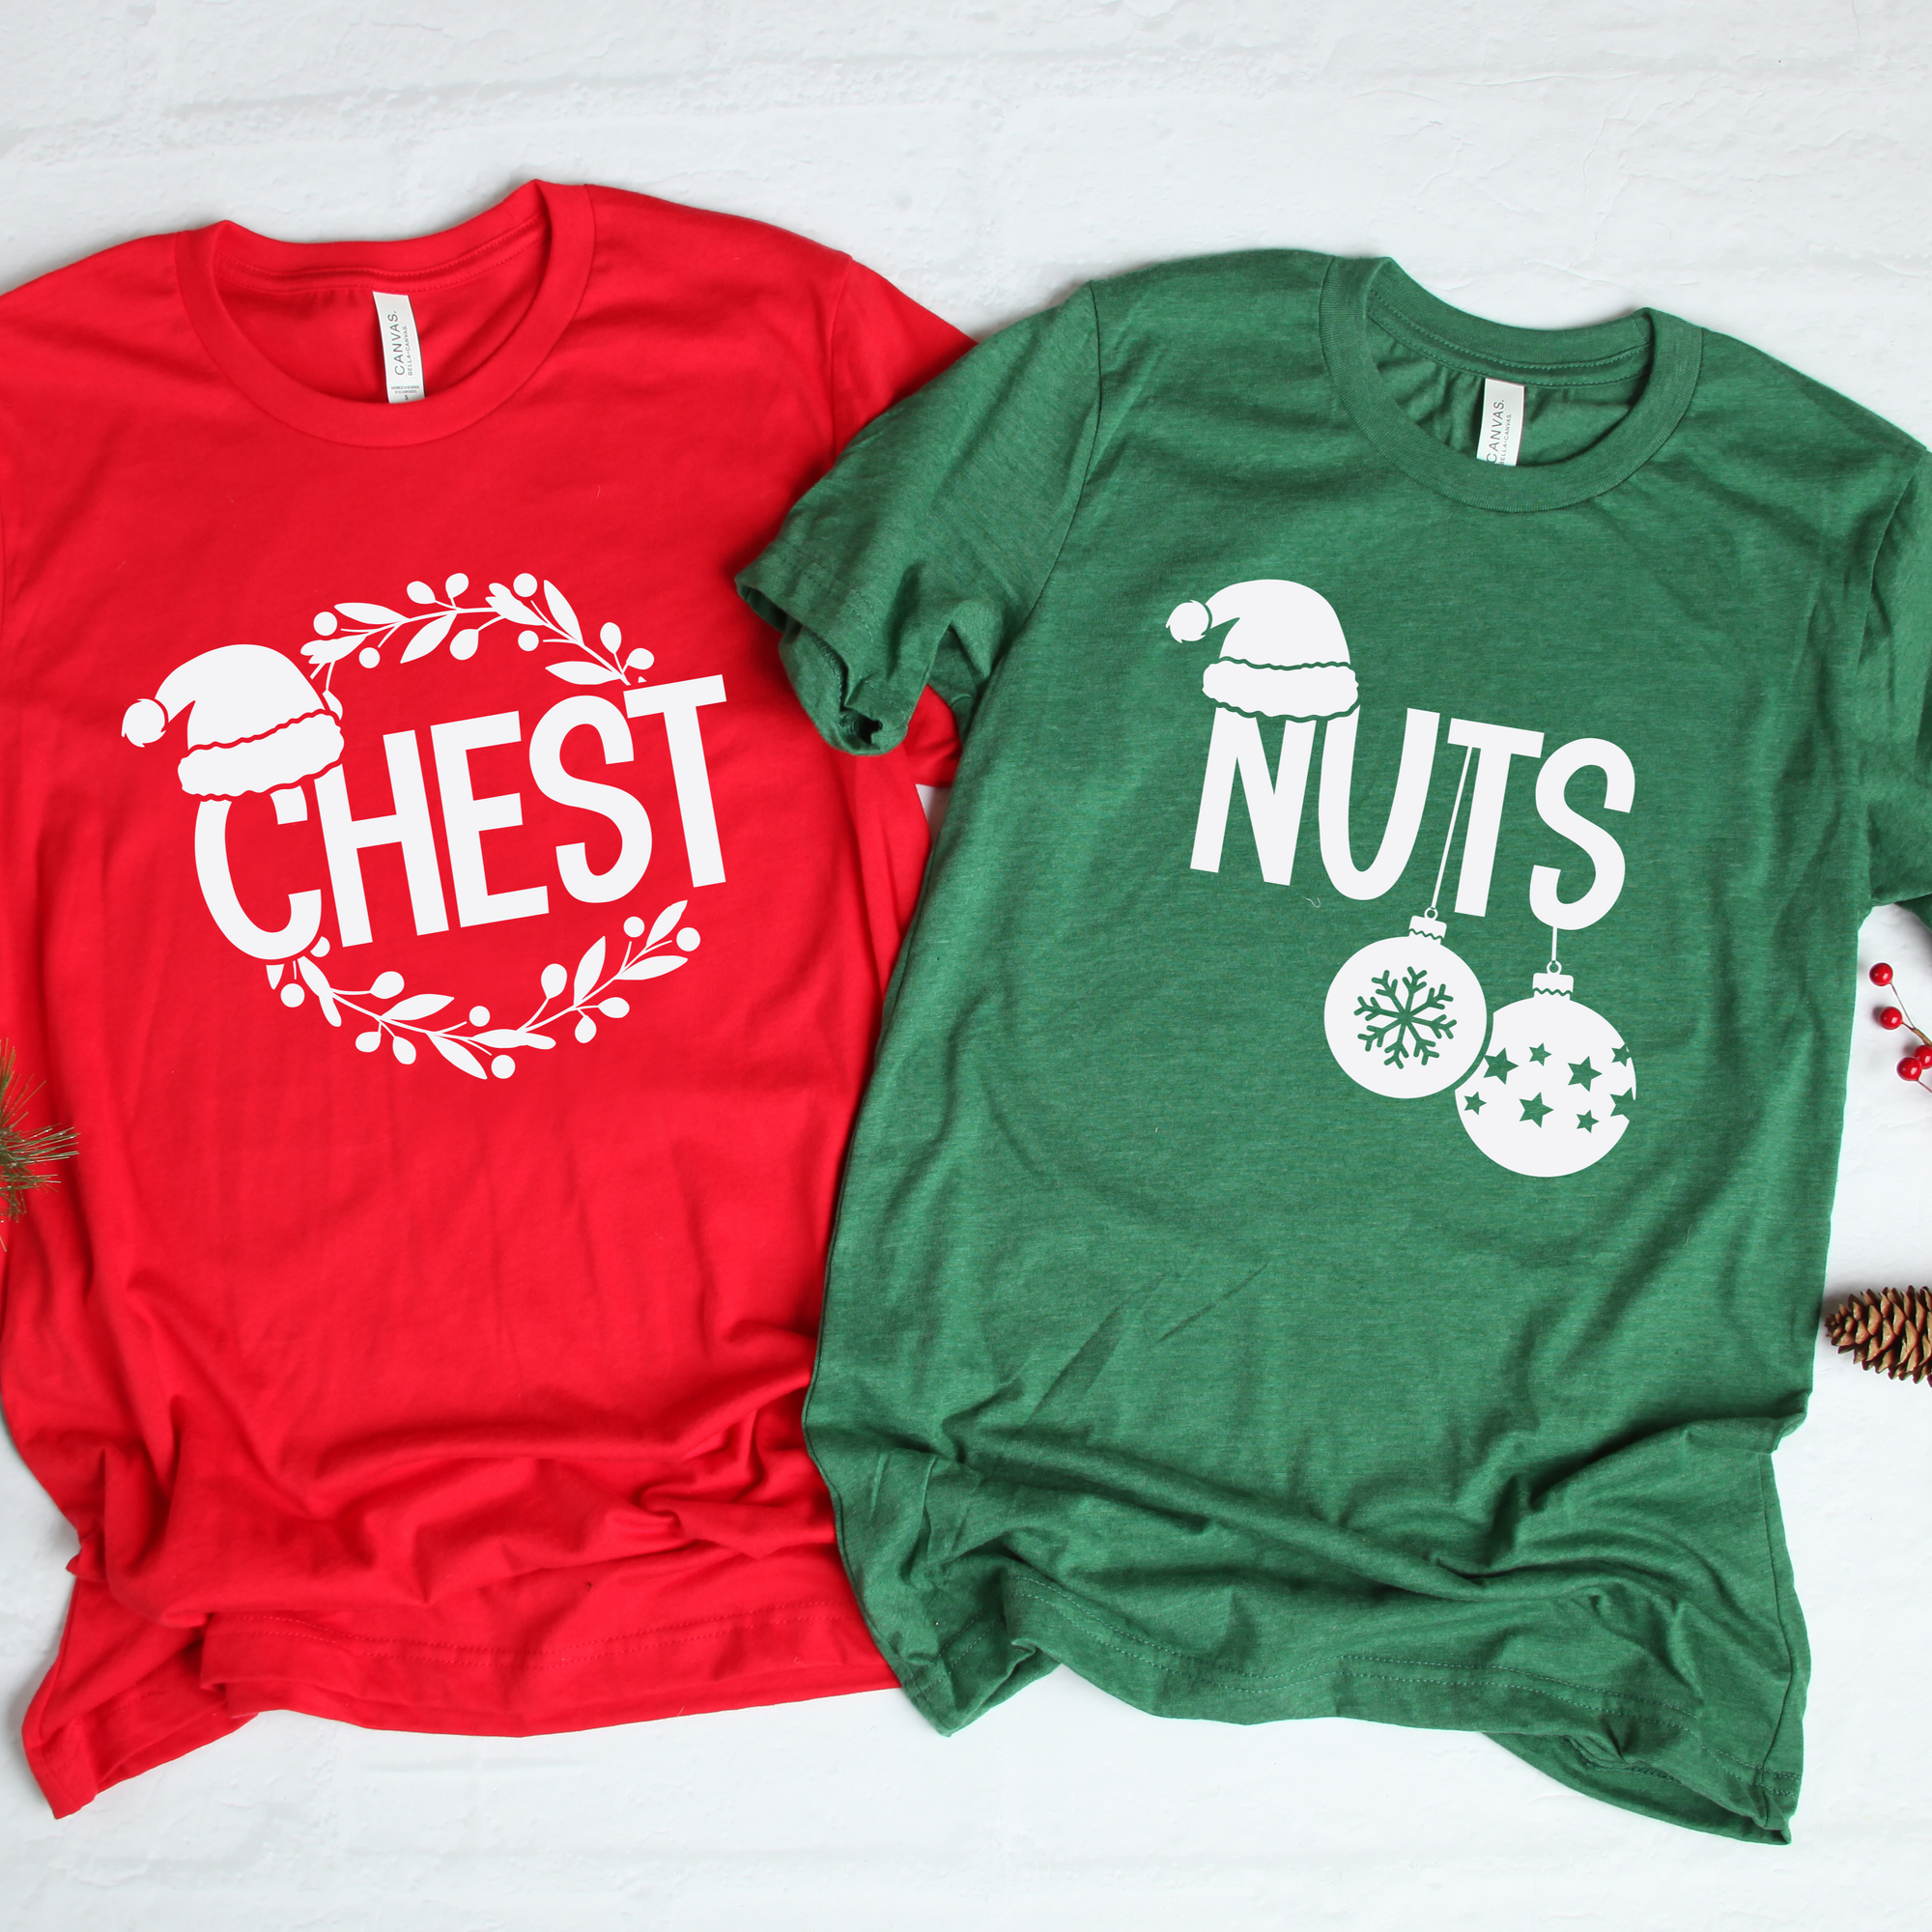 Chest Nuts Funny Couples Tees